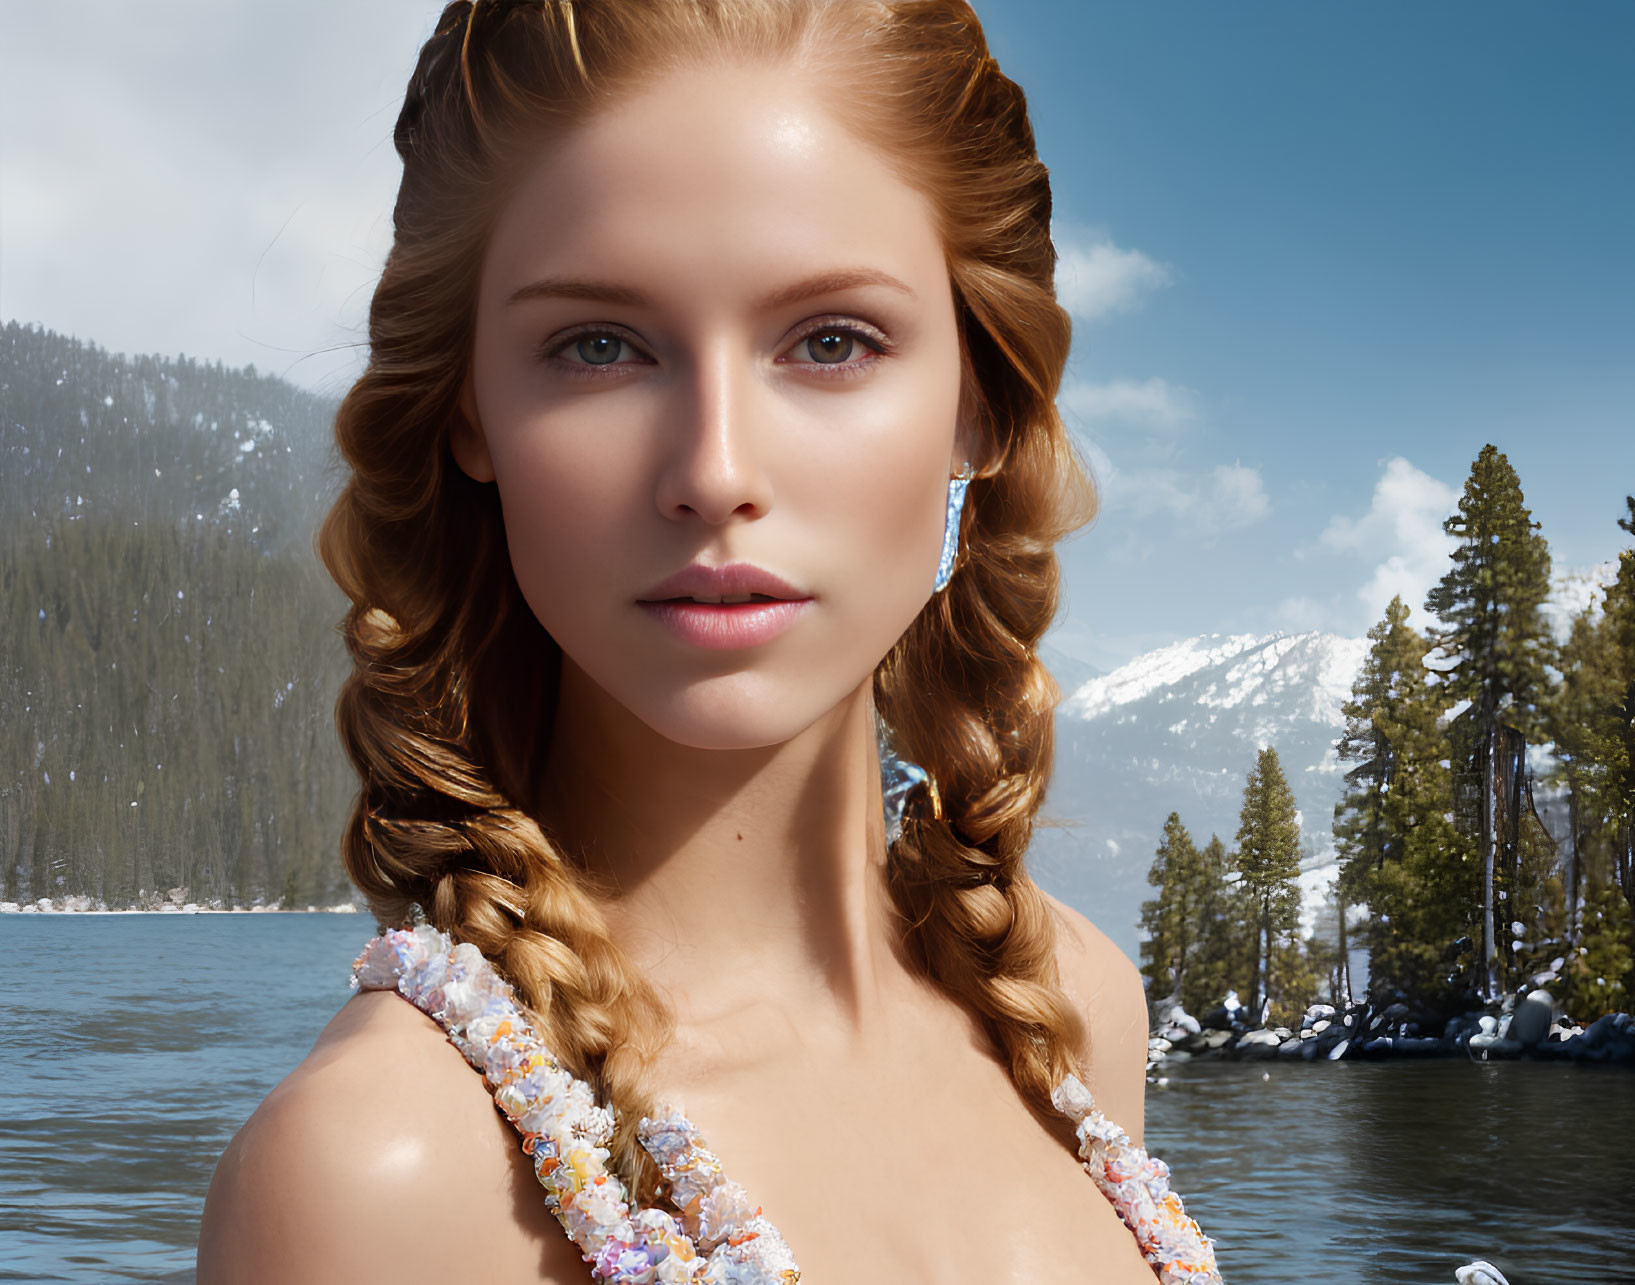 Woman with Braided Hair in Sequined Attire Against Snowy Mountain Landscape